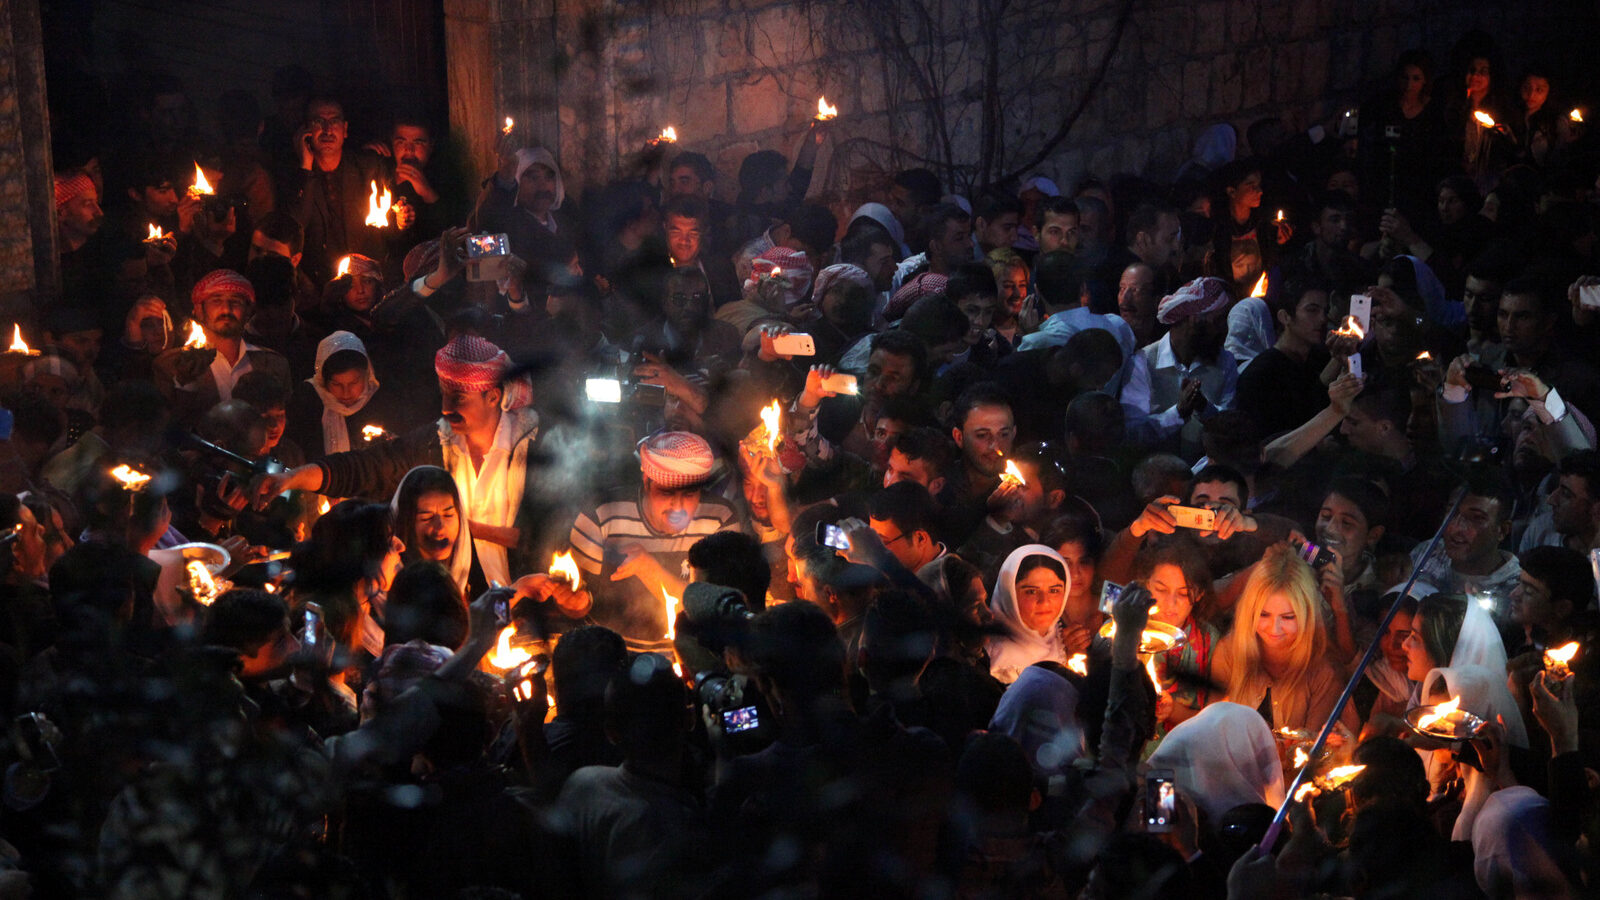 In this Tuesday, April 15, 2015 photo, Yazidis gather to light flames, some capturing the scene with their mobile phones, at the holy shrine of Lalish, 57 kilometers (35 miles) north of militant-held Mosul, Iraq, as thousands celebrate the New Year, their first since Islamic State militants swept through the area last summer. Yazidis, a centuries-old religion derived from Zoroastrianism, Christianity and Islam, believe that the occasion marks the creation of the earth, also the day that God created the holy shrine in Lalish. (AP Photo/Seivan M.Salim)